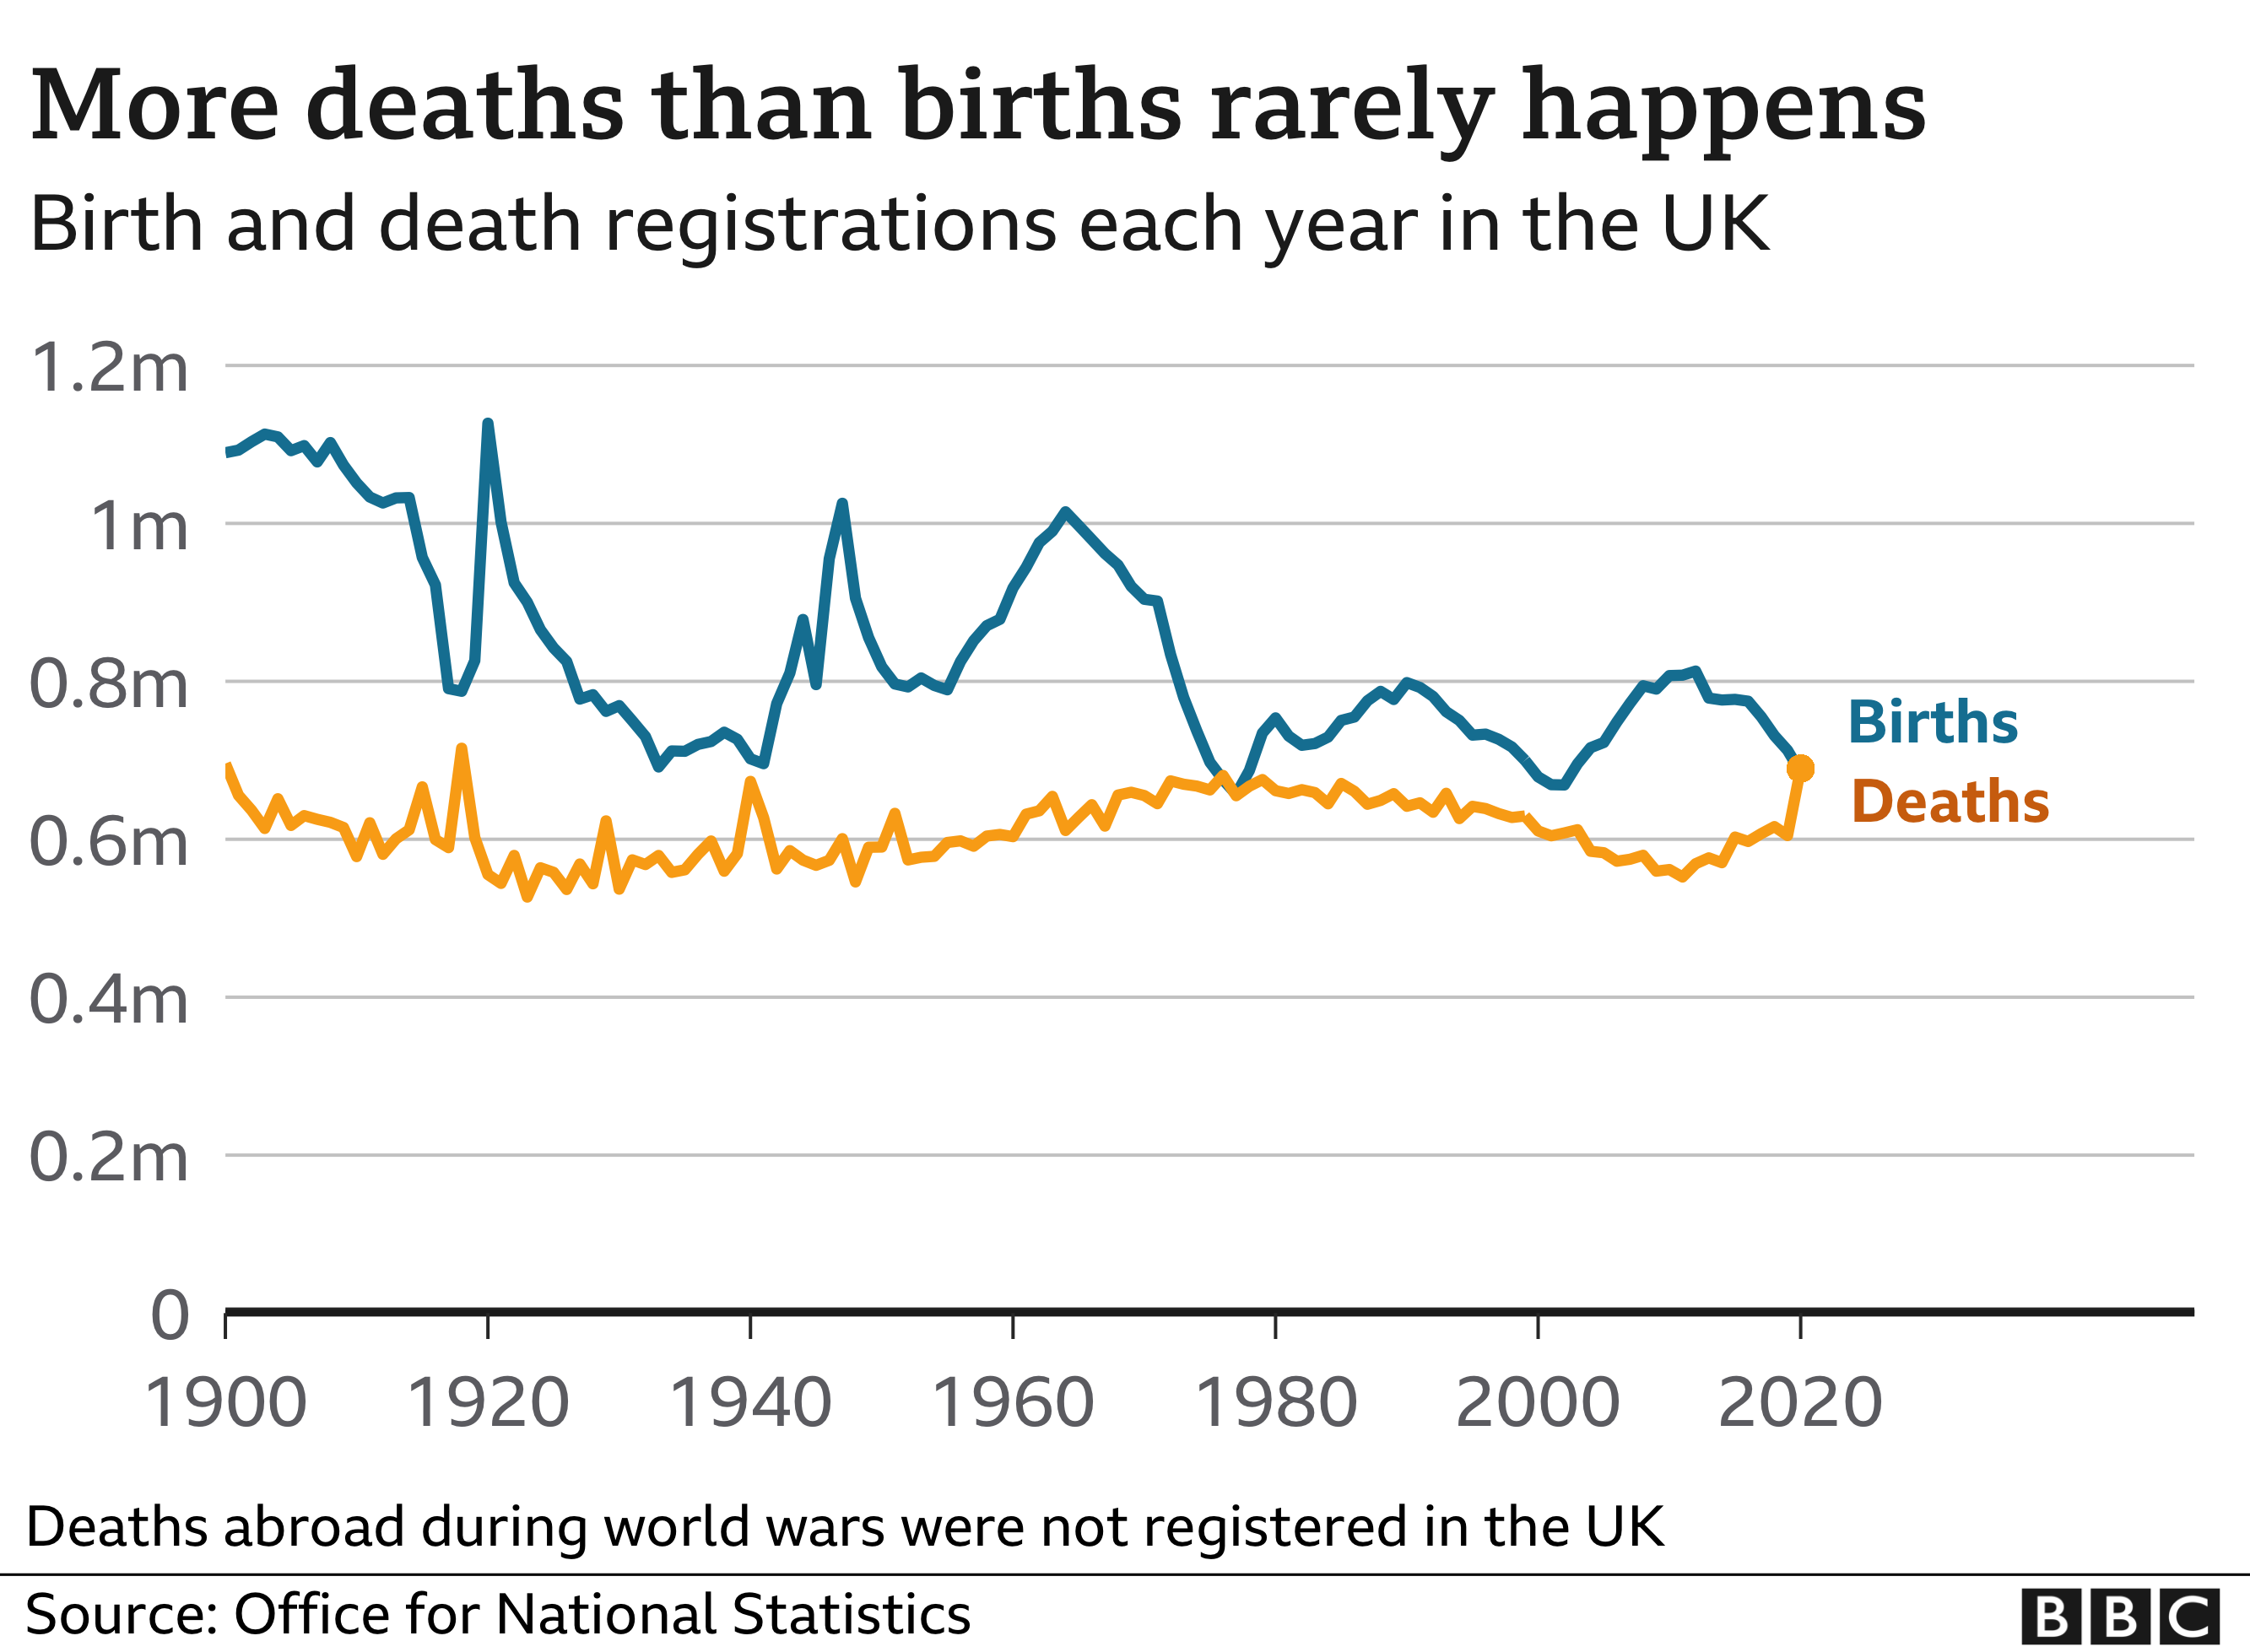 Births compared to deaths since 1900